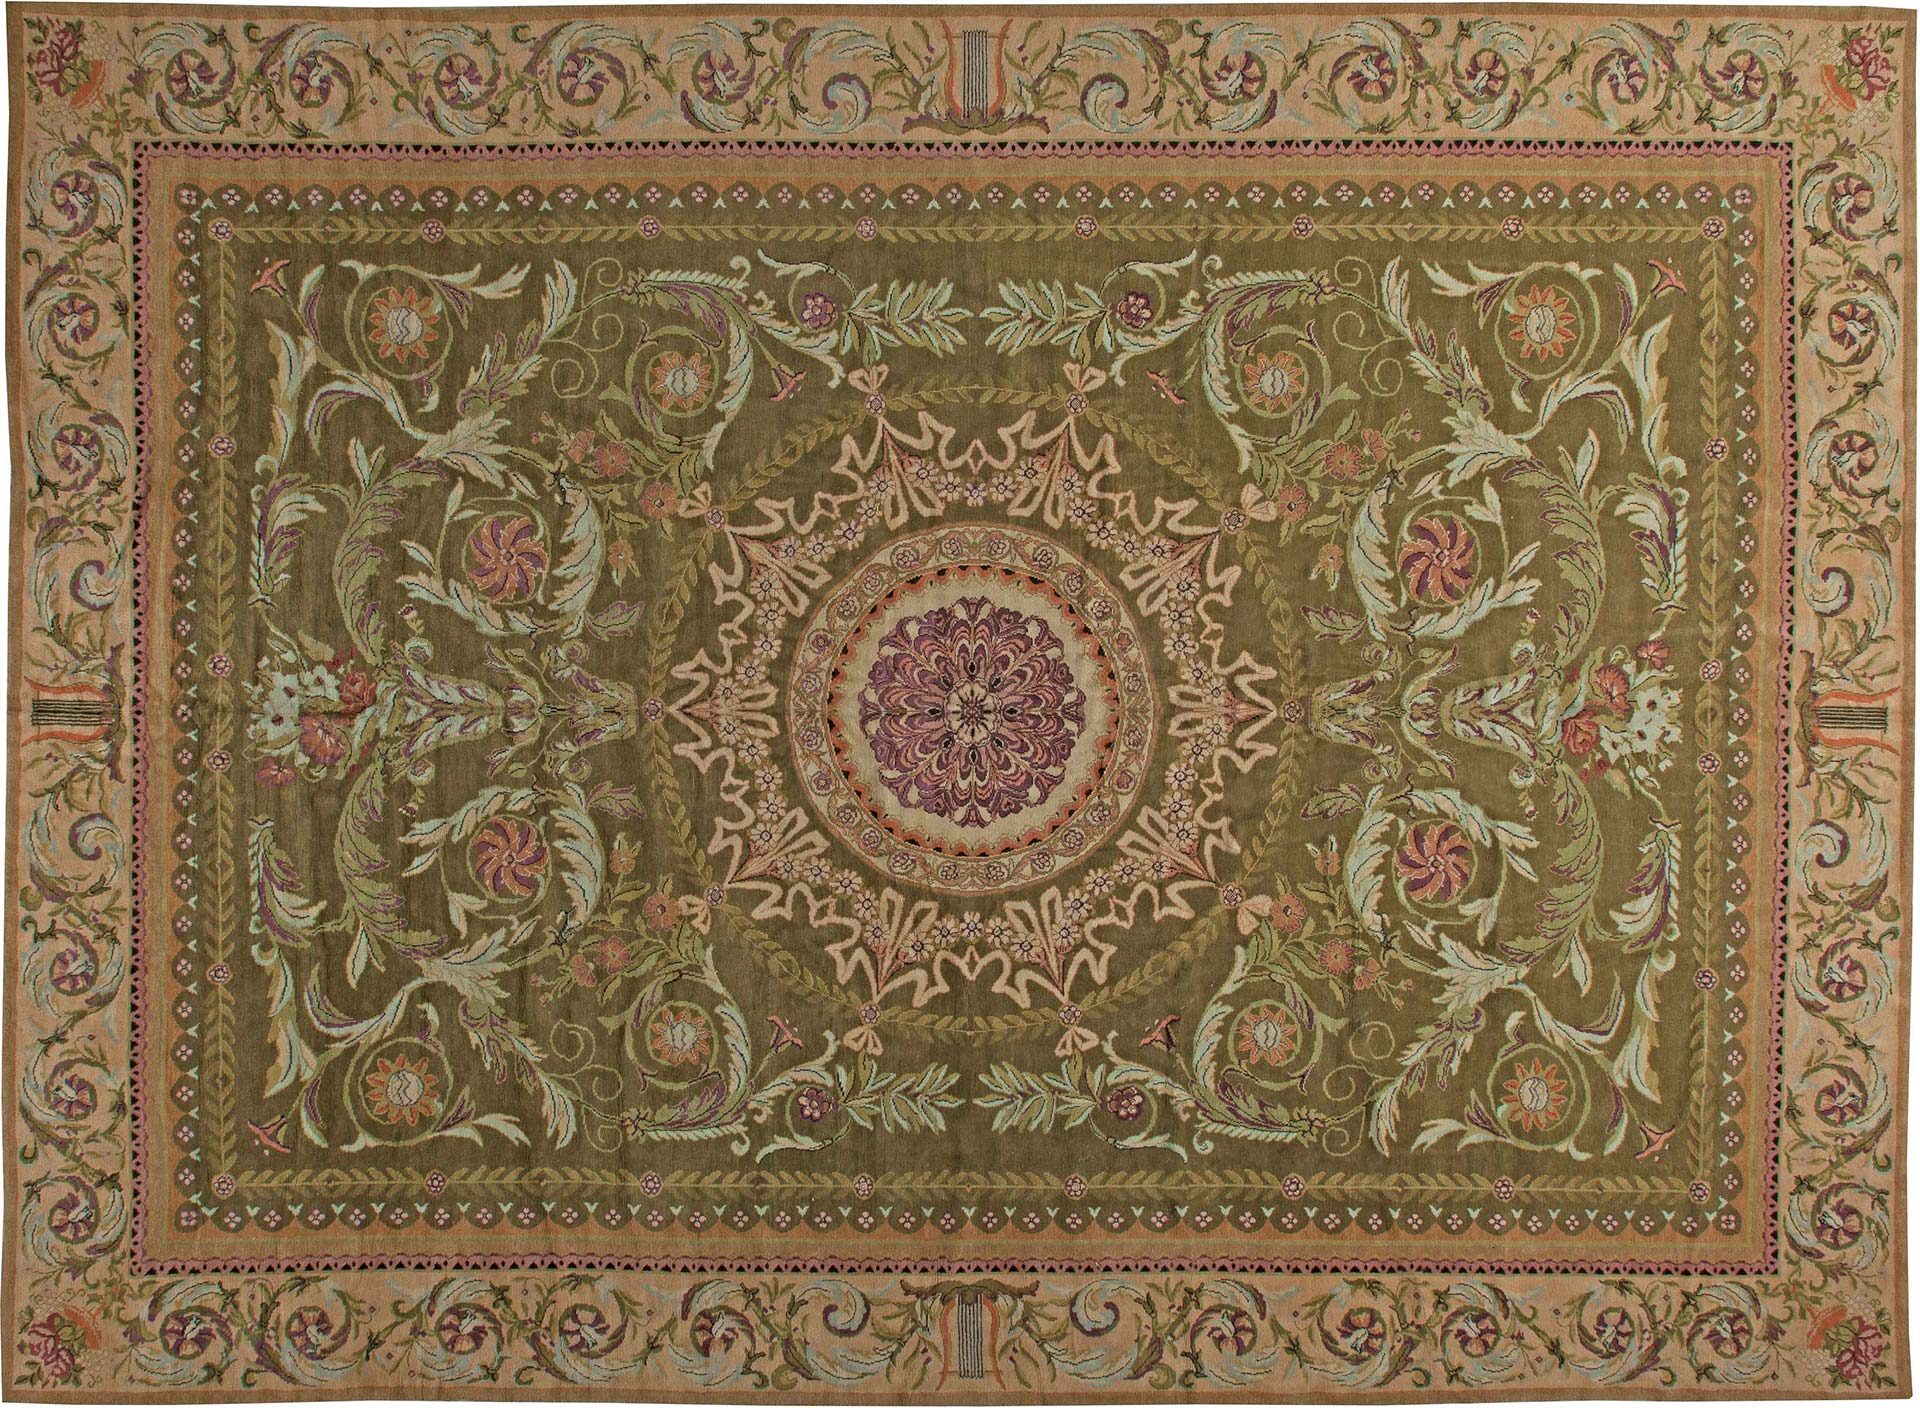 An oversized antique Savonnerie rug in moss green. Circa 1900’s, France. Rug size: 16’3” x 21’9”